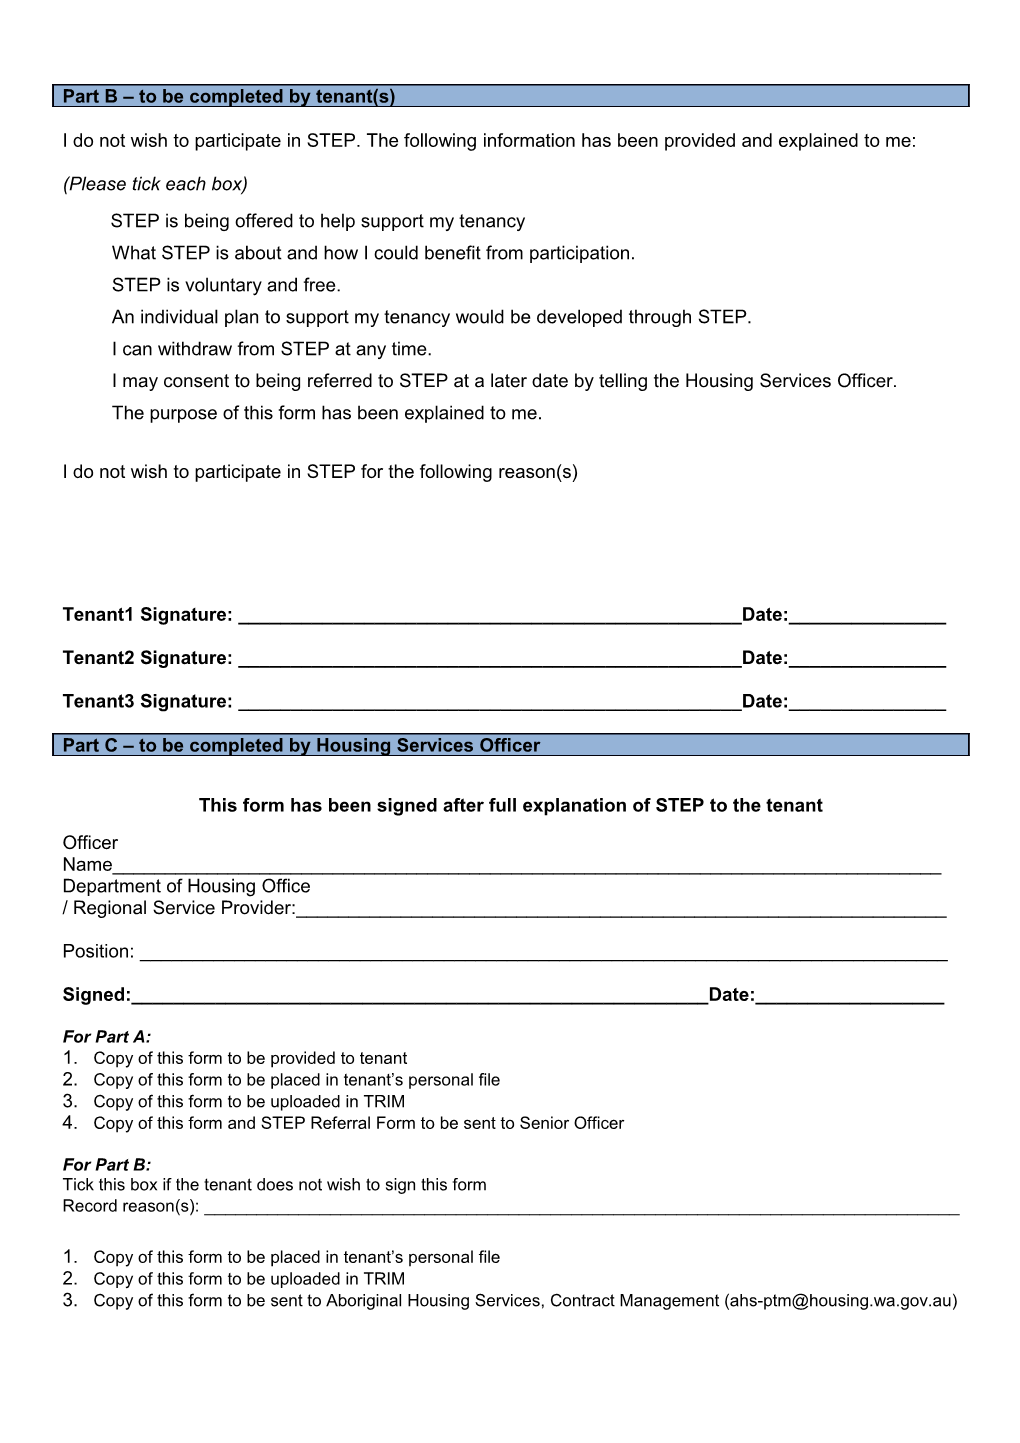 (This Form Is to Be Used to Give the Department of Housing /Regional Service Provider